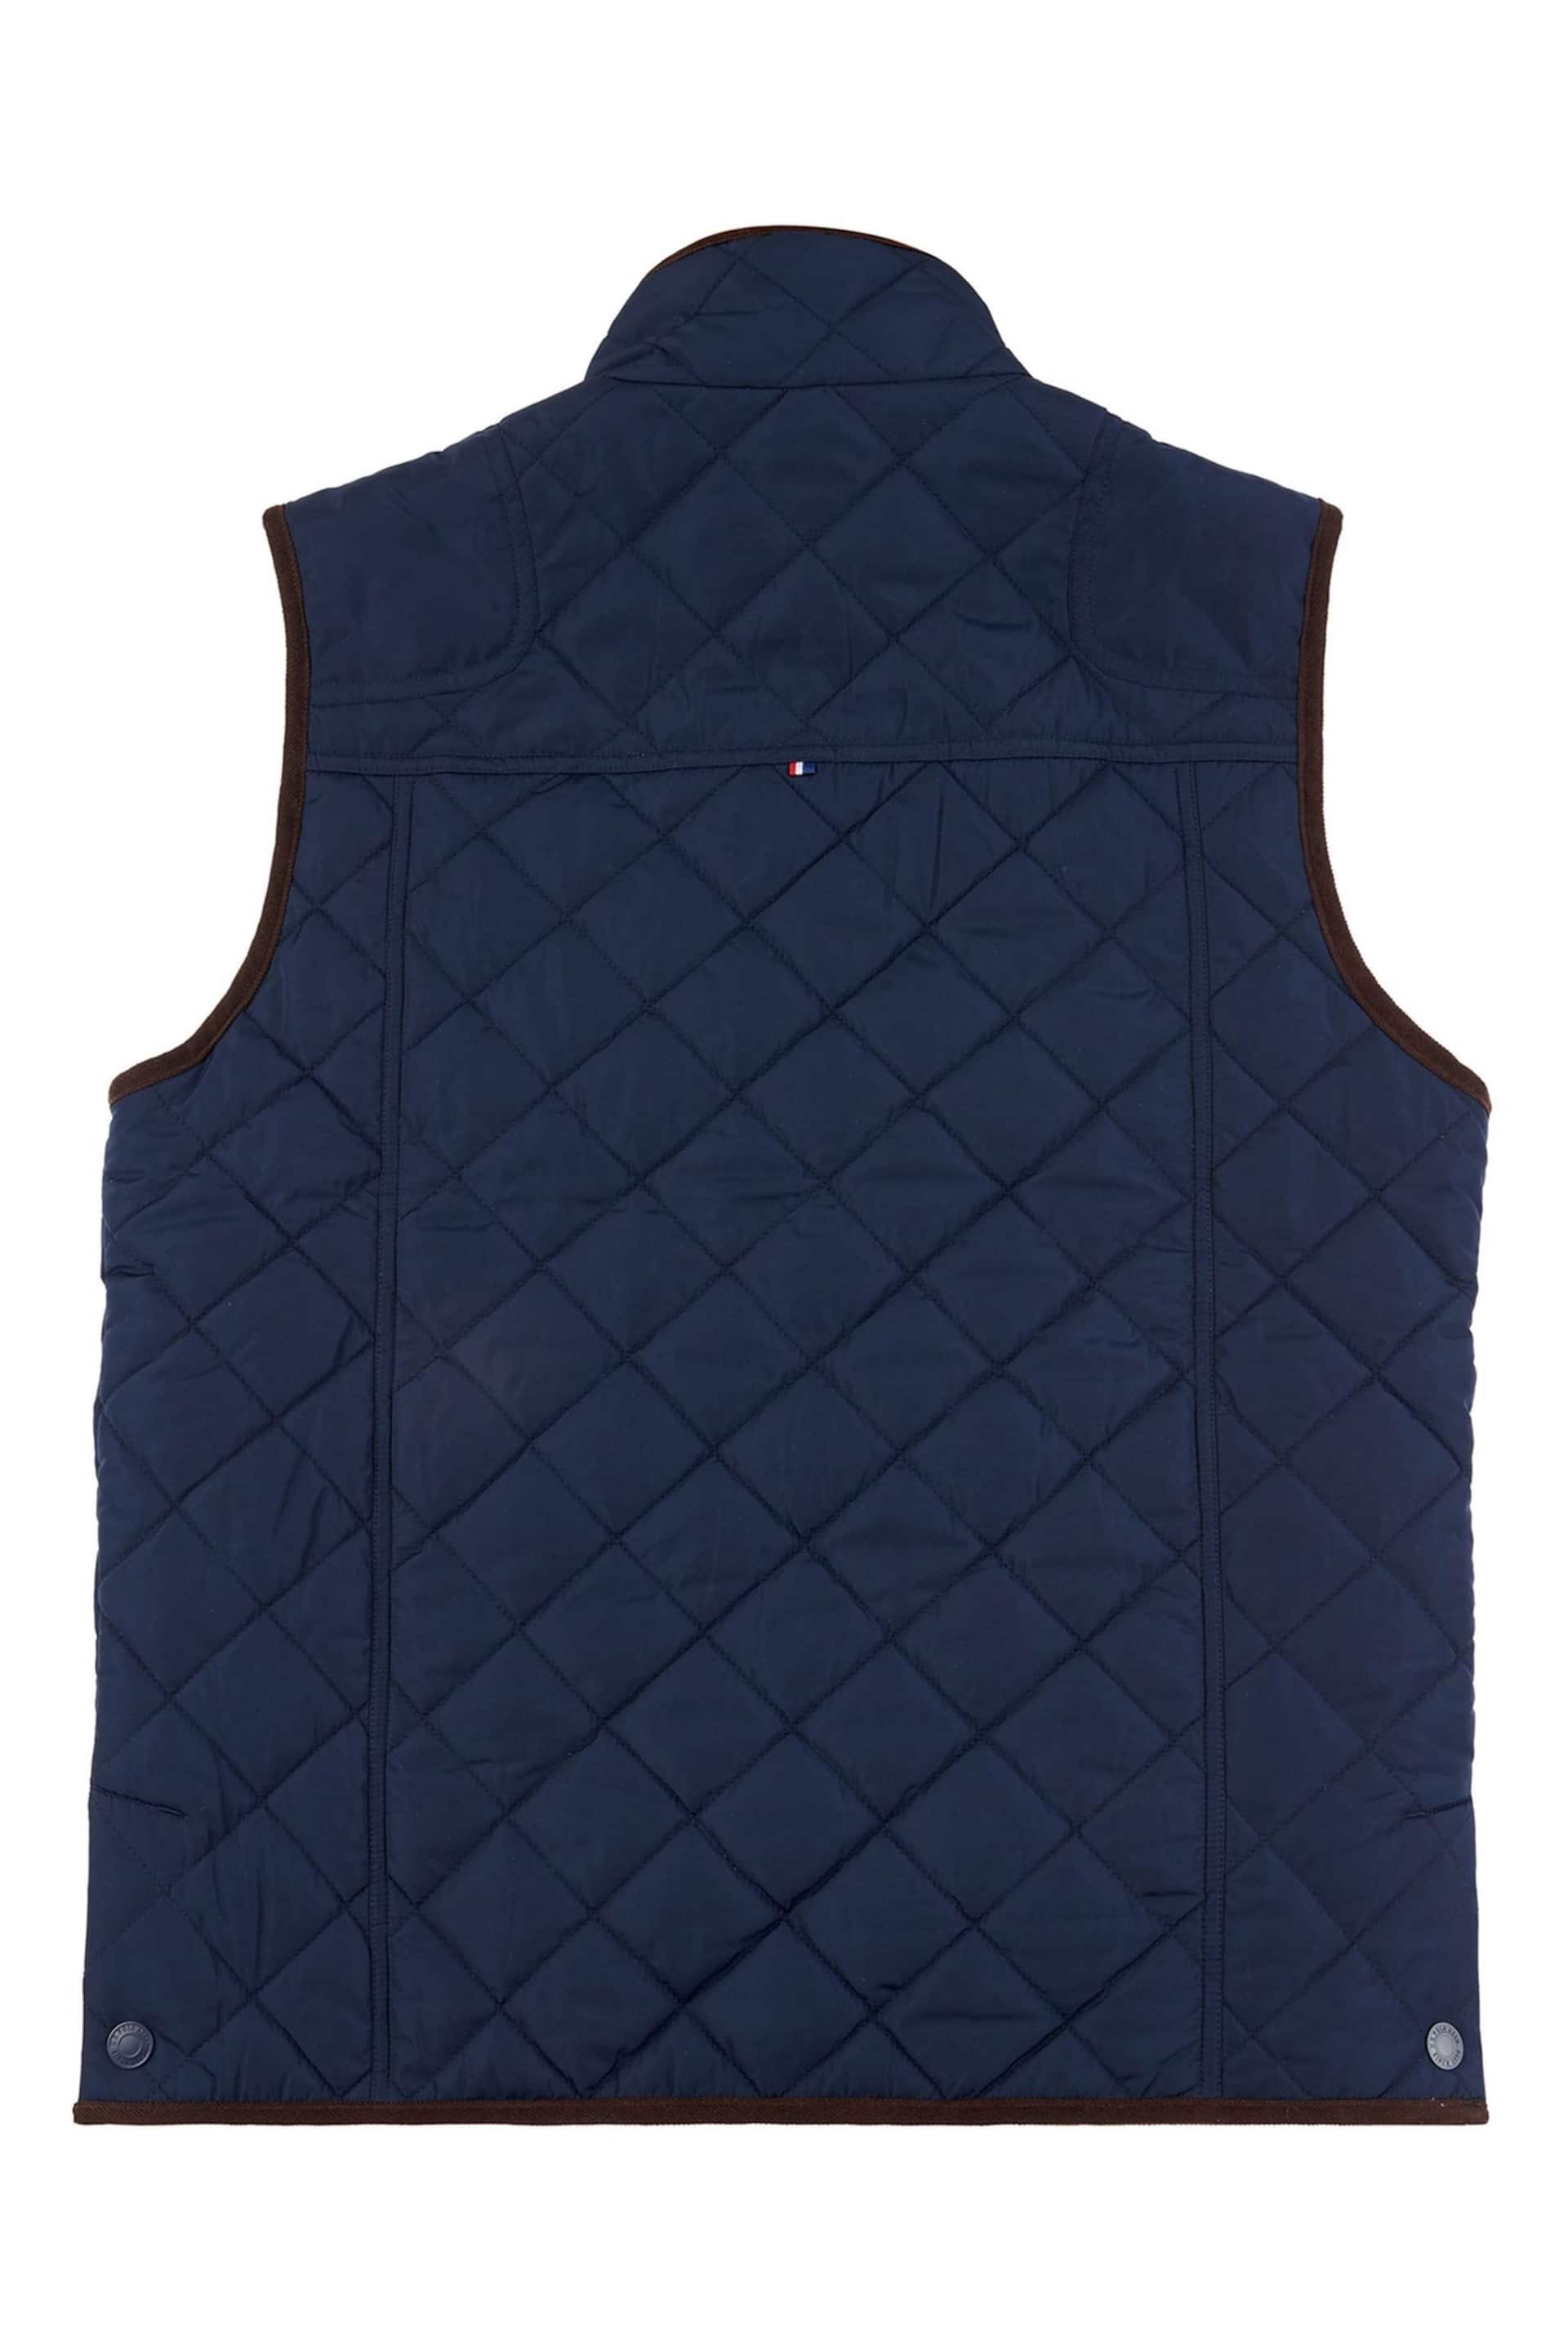 U.S. Polo Assn. Mens Blue Quilted Hacking Gilet - Image 7 of 8